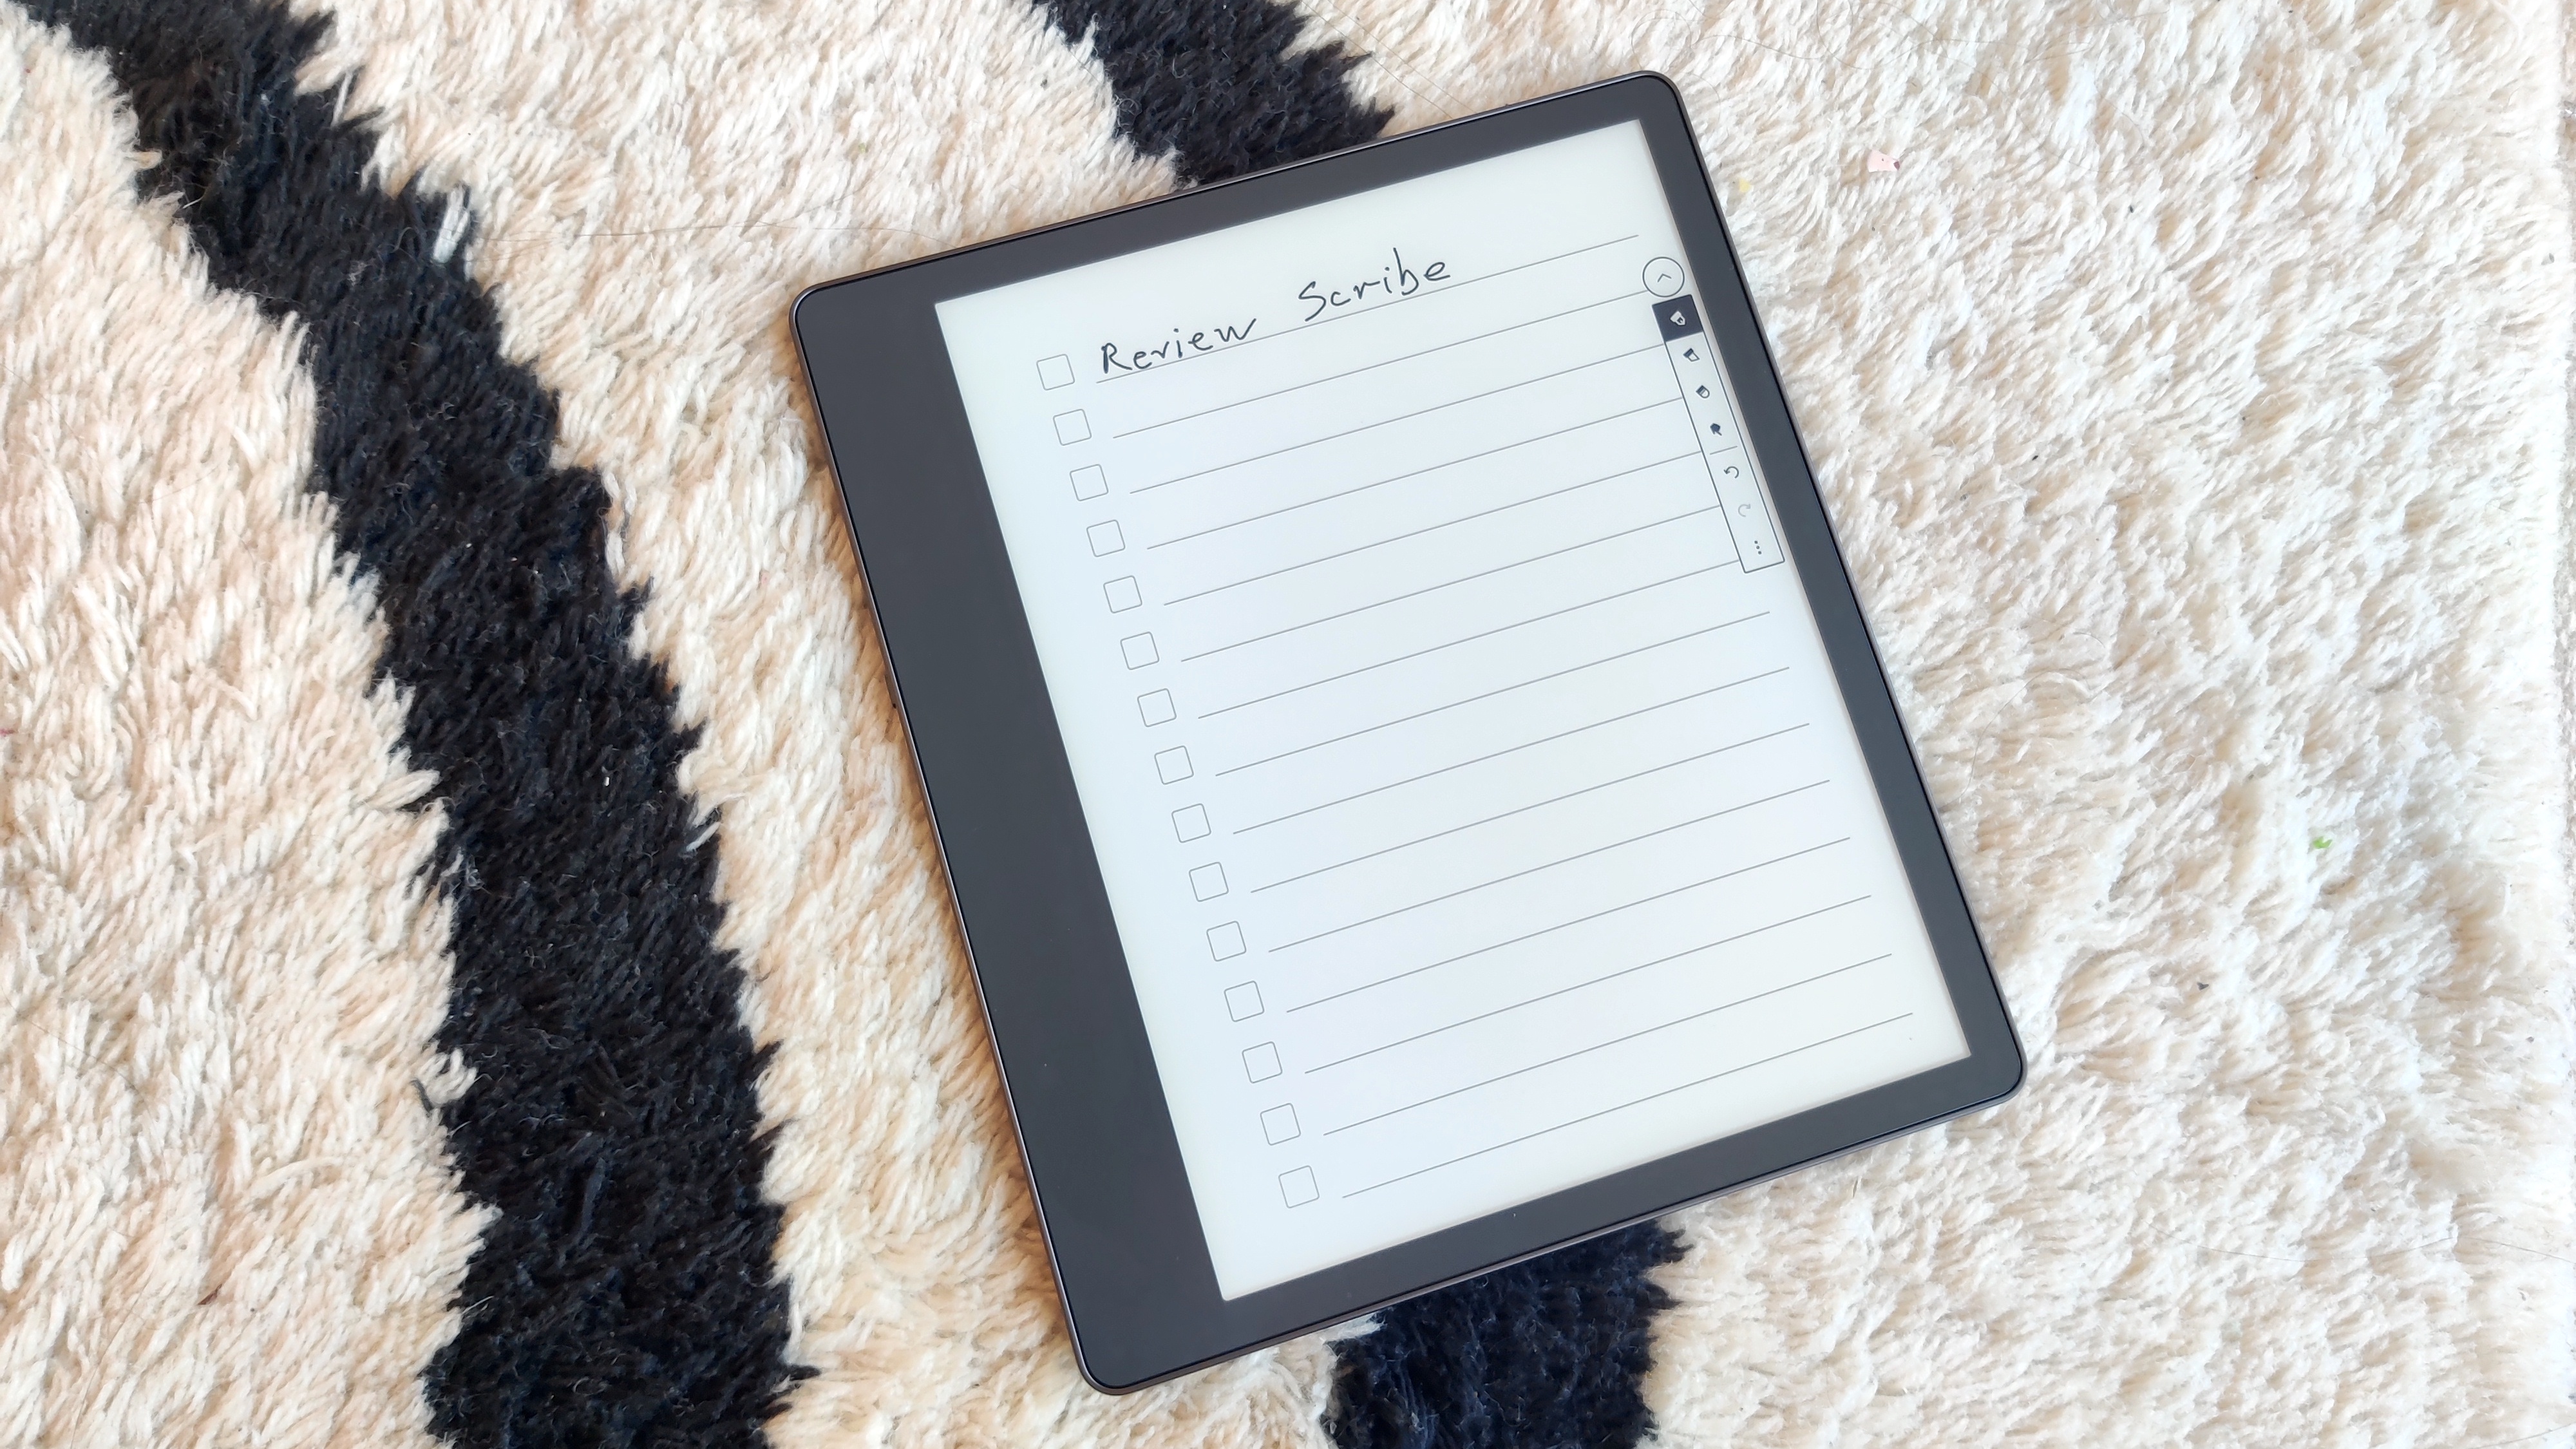 Official Site: Kindle Scribe, 16 GB the first Kindle for reading,  writing, journaling and sketching - 10.2” Display